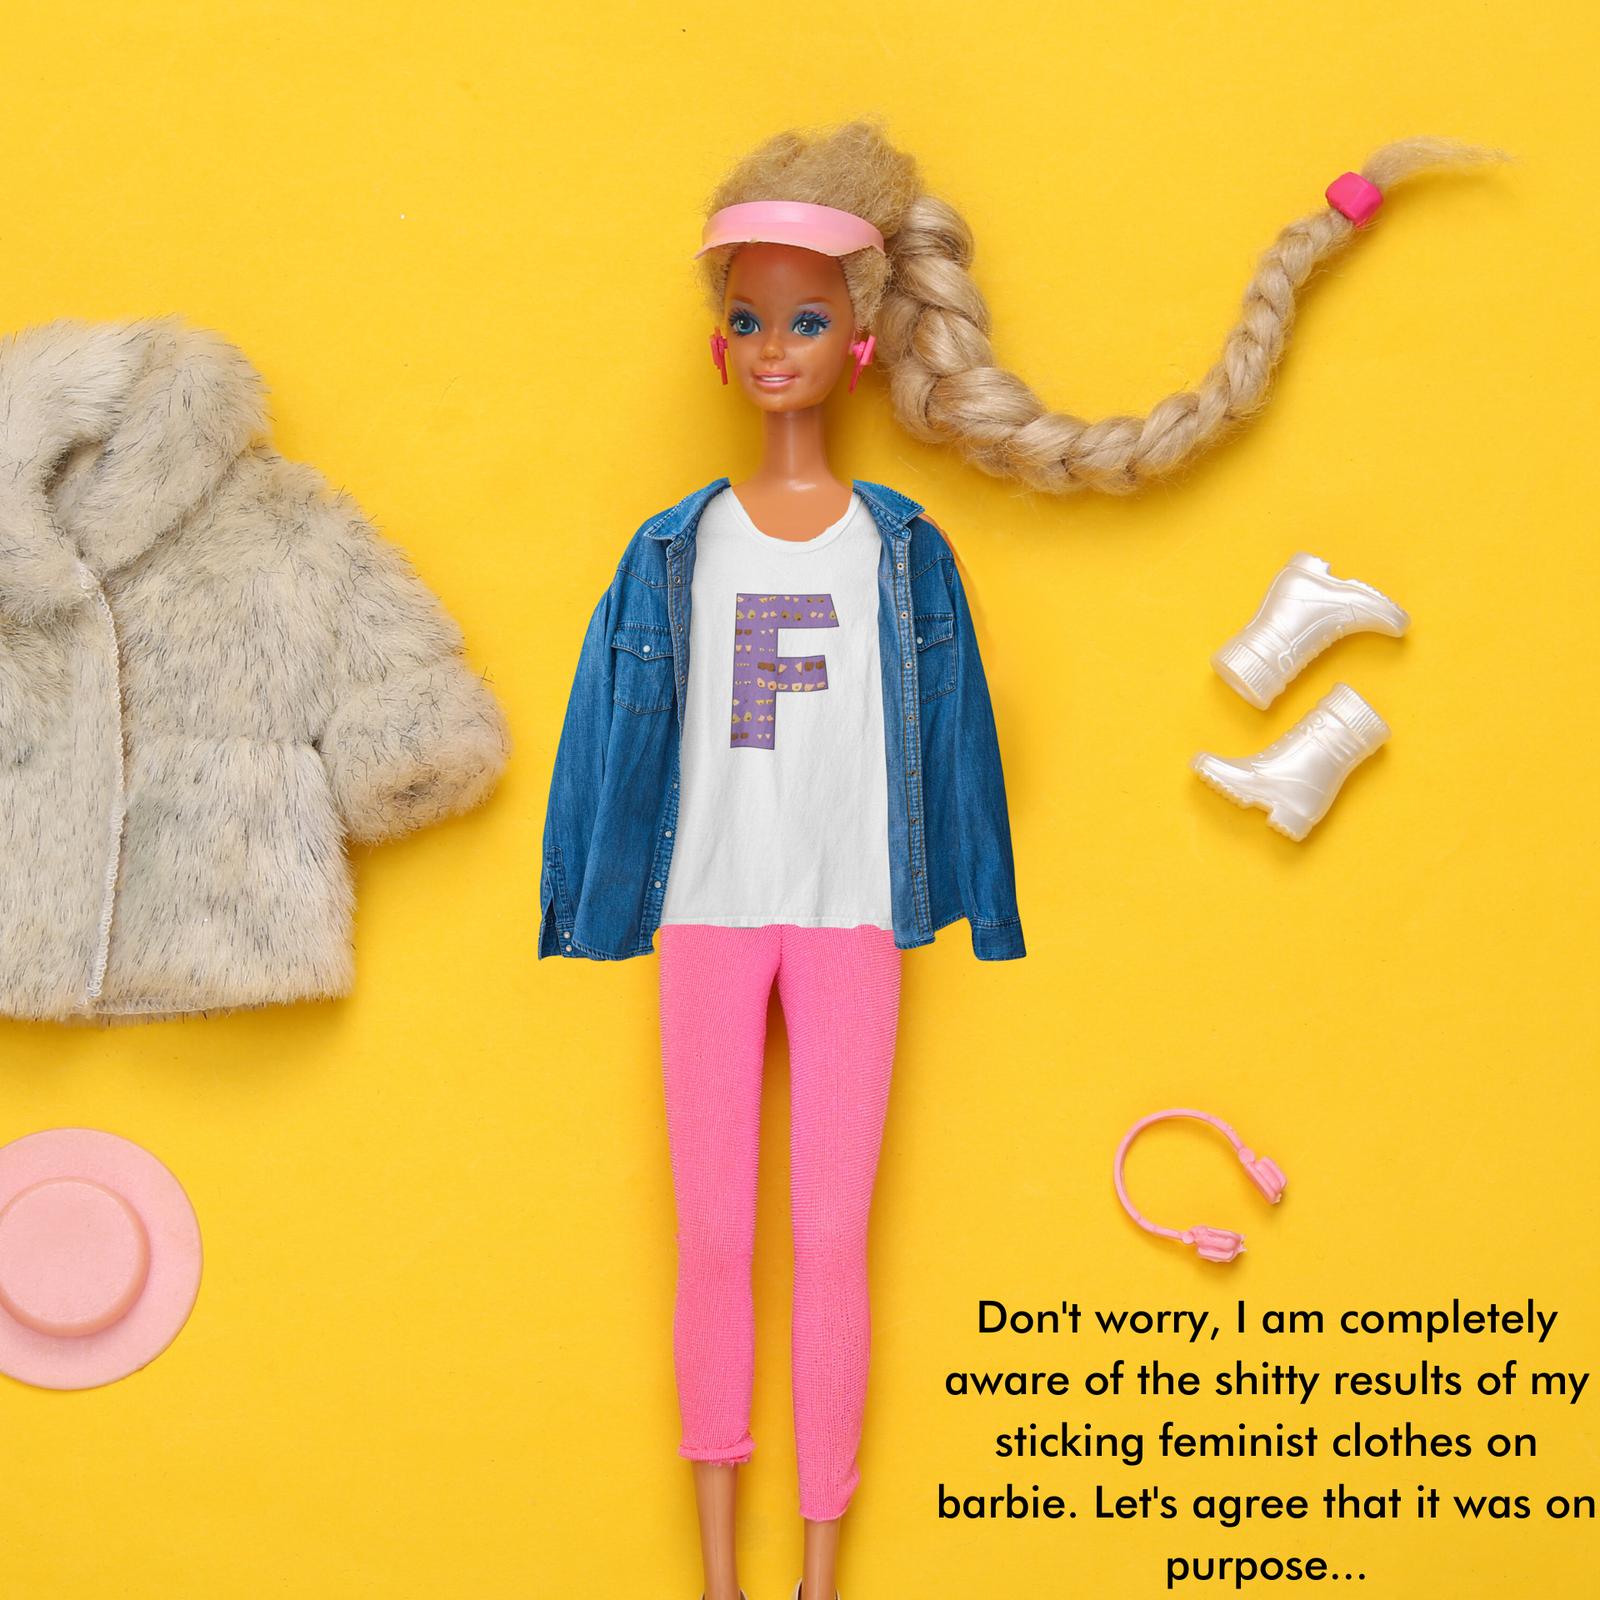 Interview - Barbie (if she were a feminist icon) - The Feminist Shop